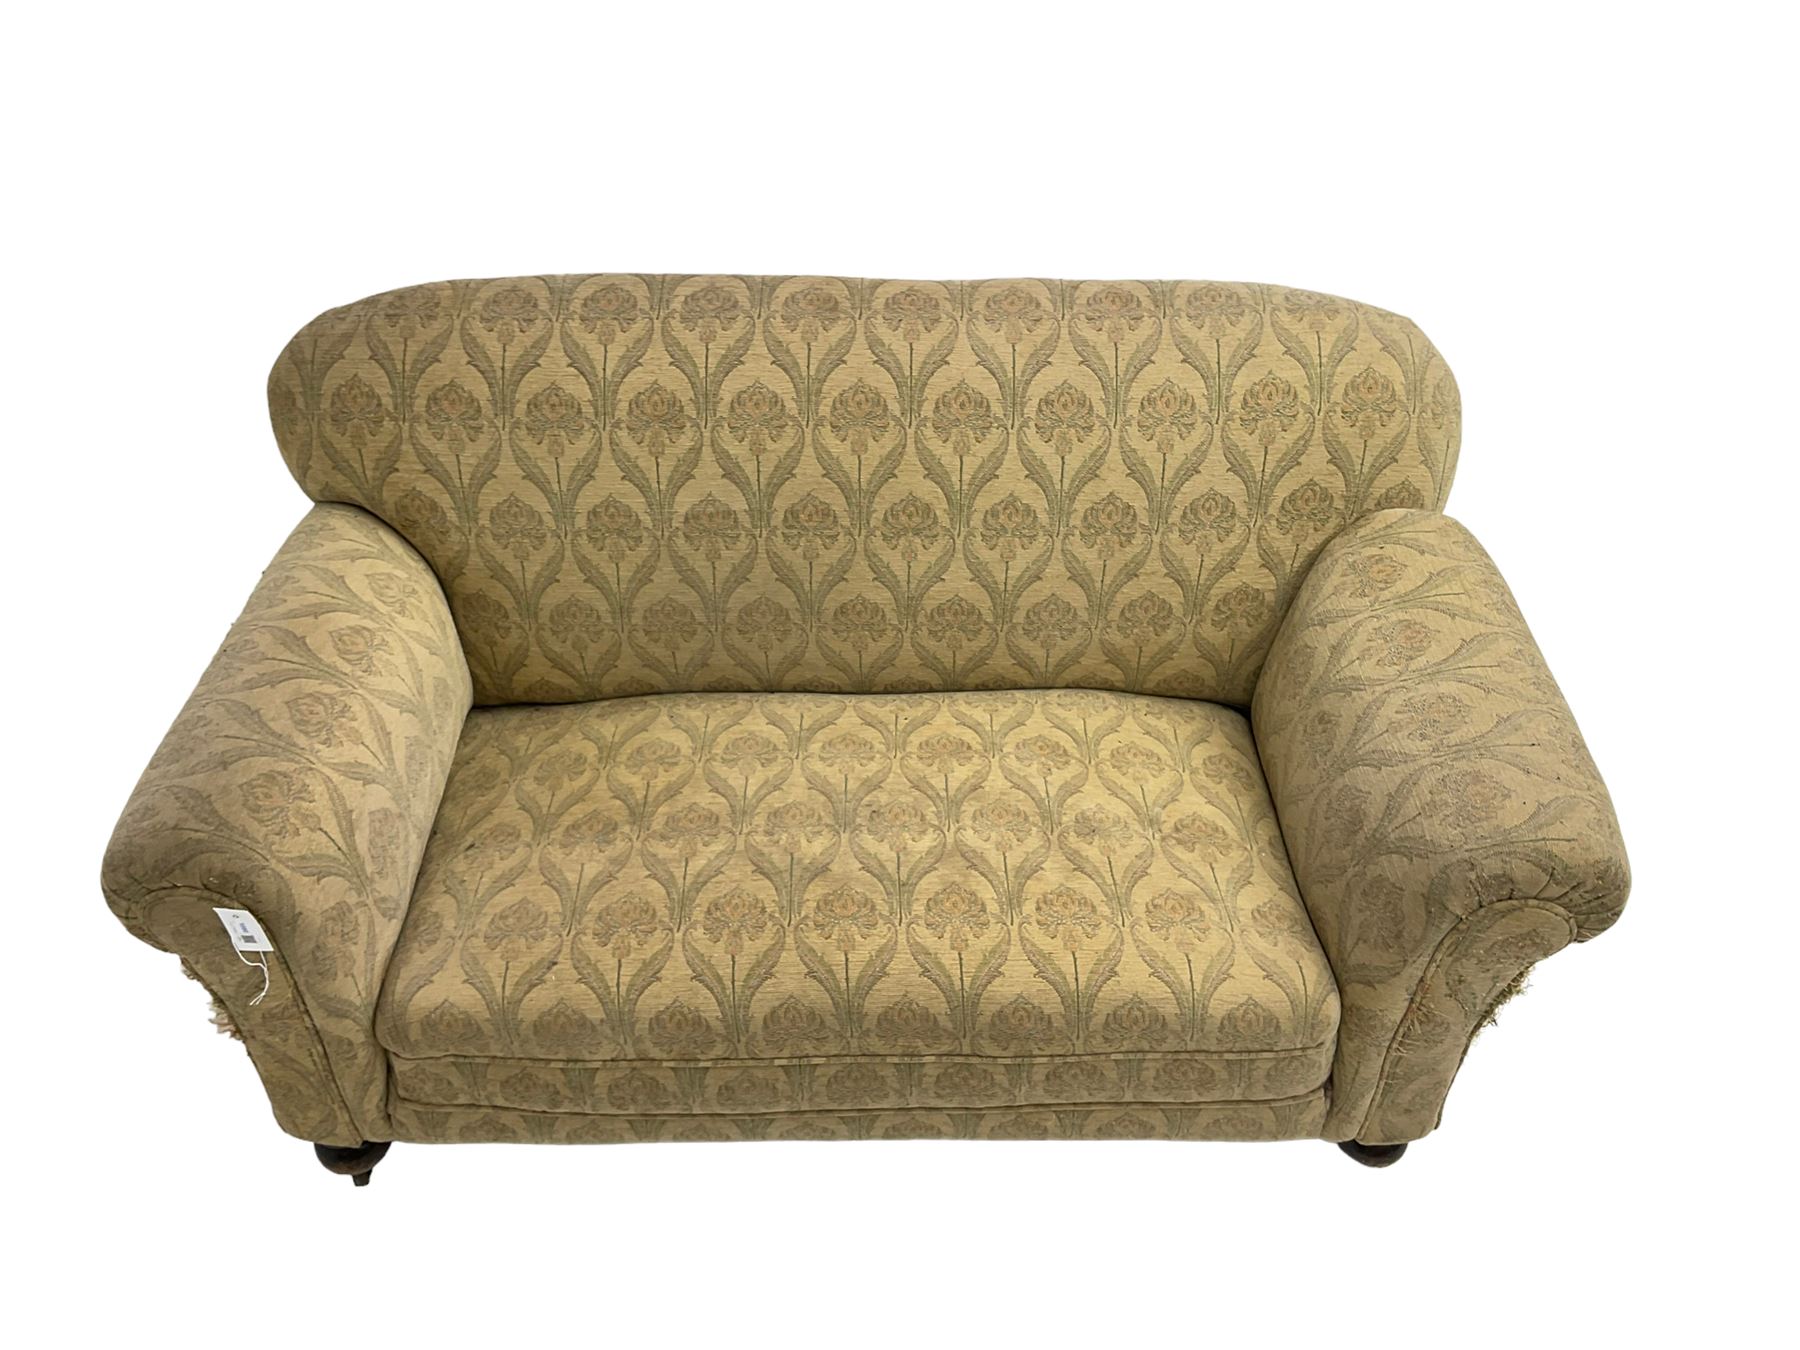 Early 20th century two seat sofa - Image 6 of 7